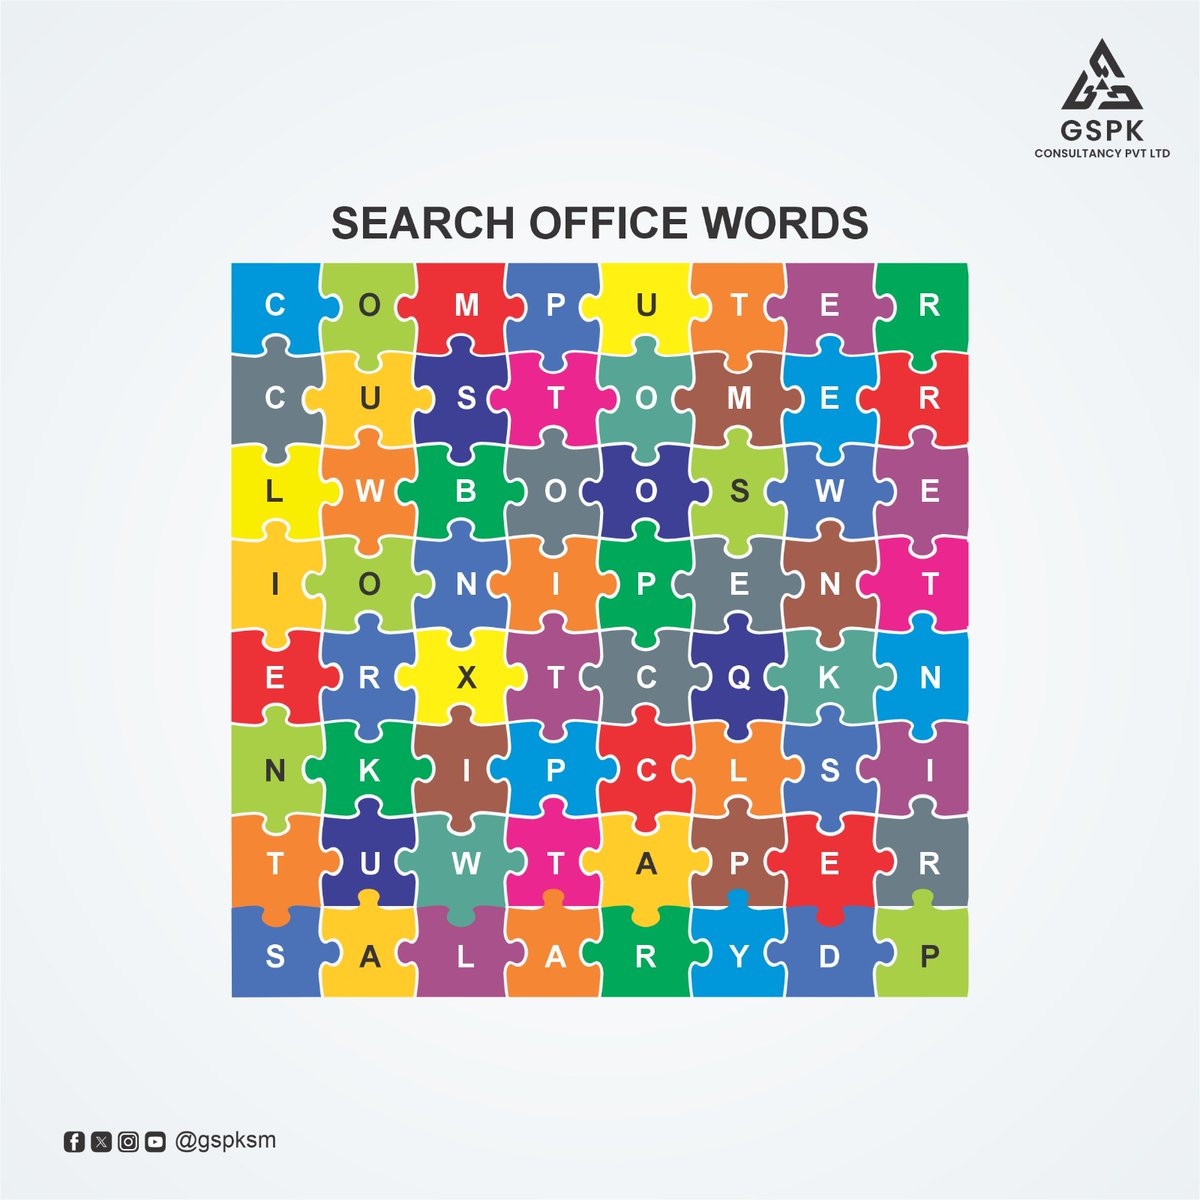 CAN YOU FIND IT??? There are 13 words related to OFFICE, comment if you find them. eg . WORK

#puzzle #puzzletime #GSPK #GspkConsultancy #socialmediaagency #digitalmarketing #digitalmedia #socialmediamarketing #socialmediastrategy